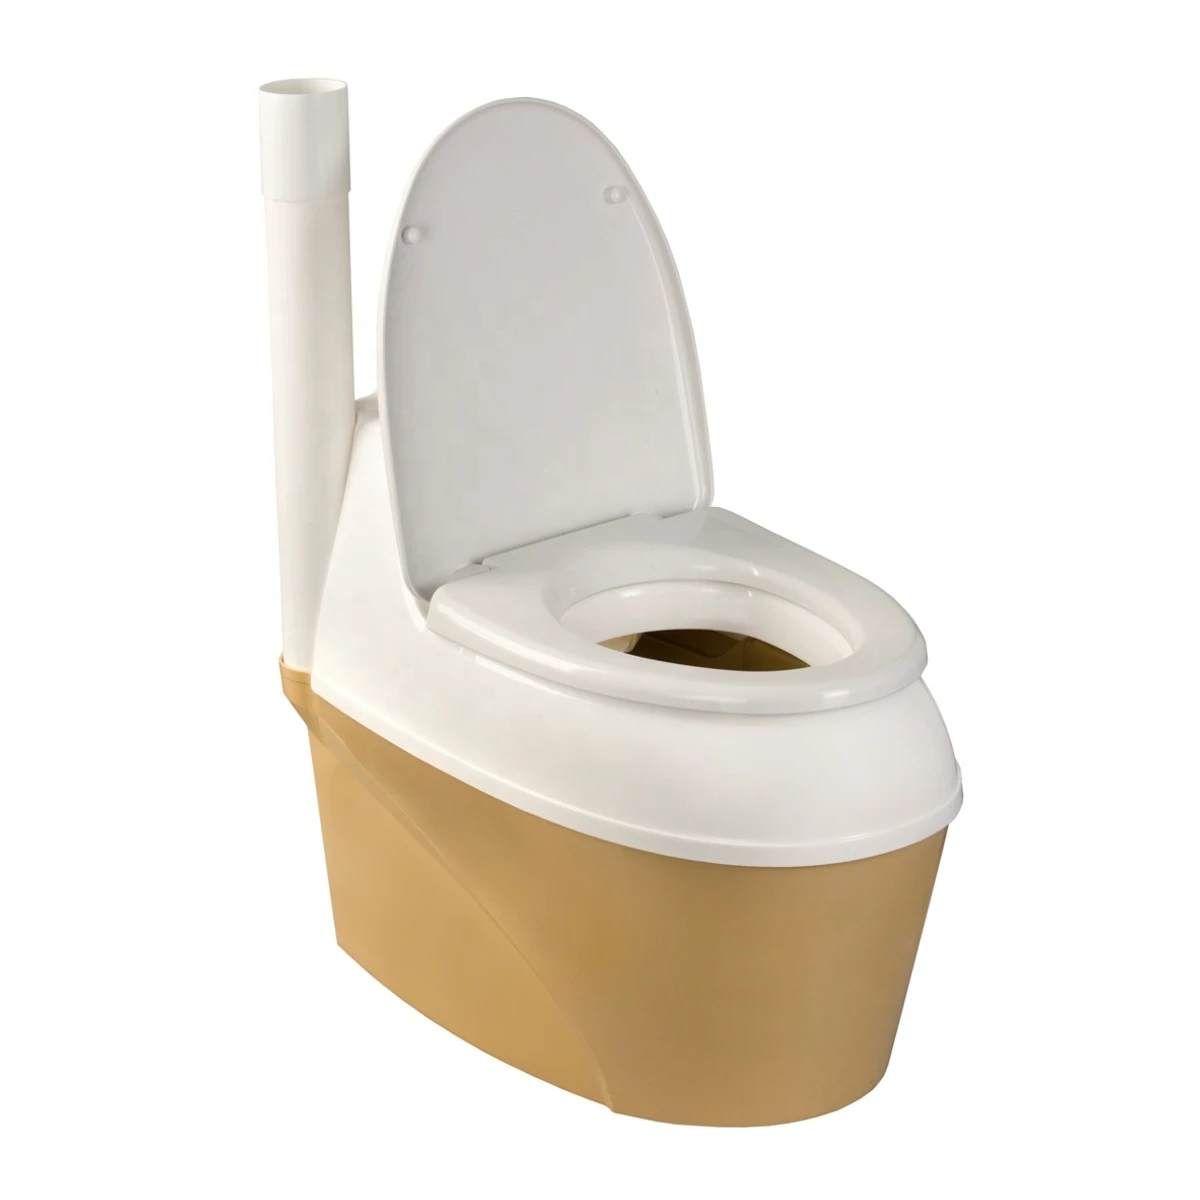 Reliable portable composting toilet, PE plastict, easy to maintain